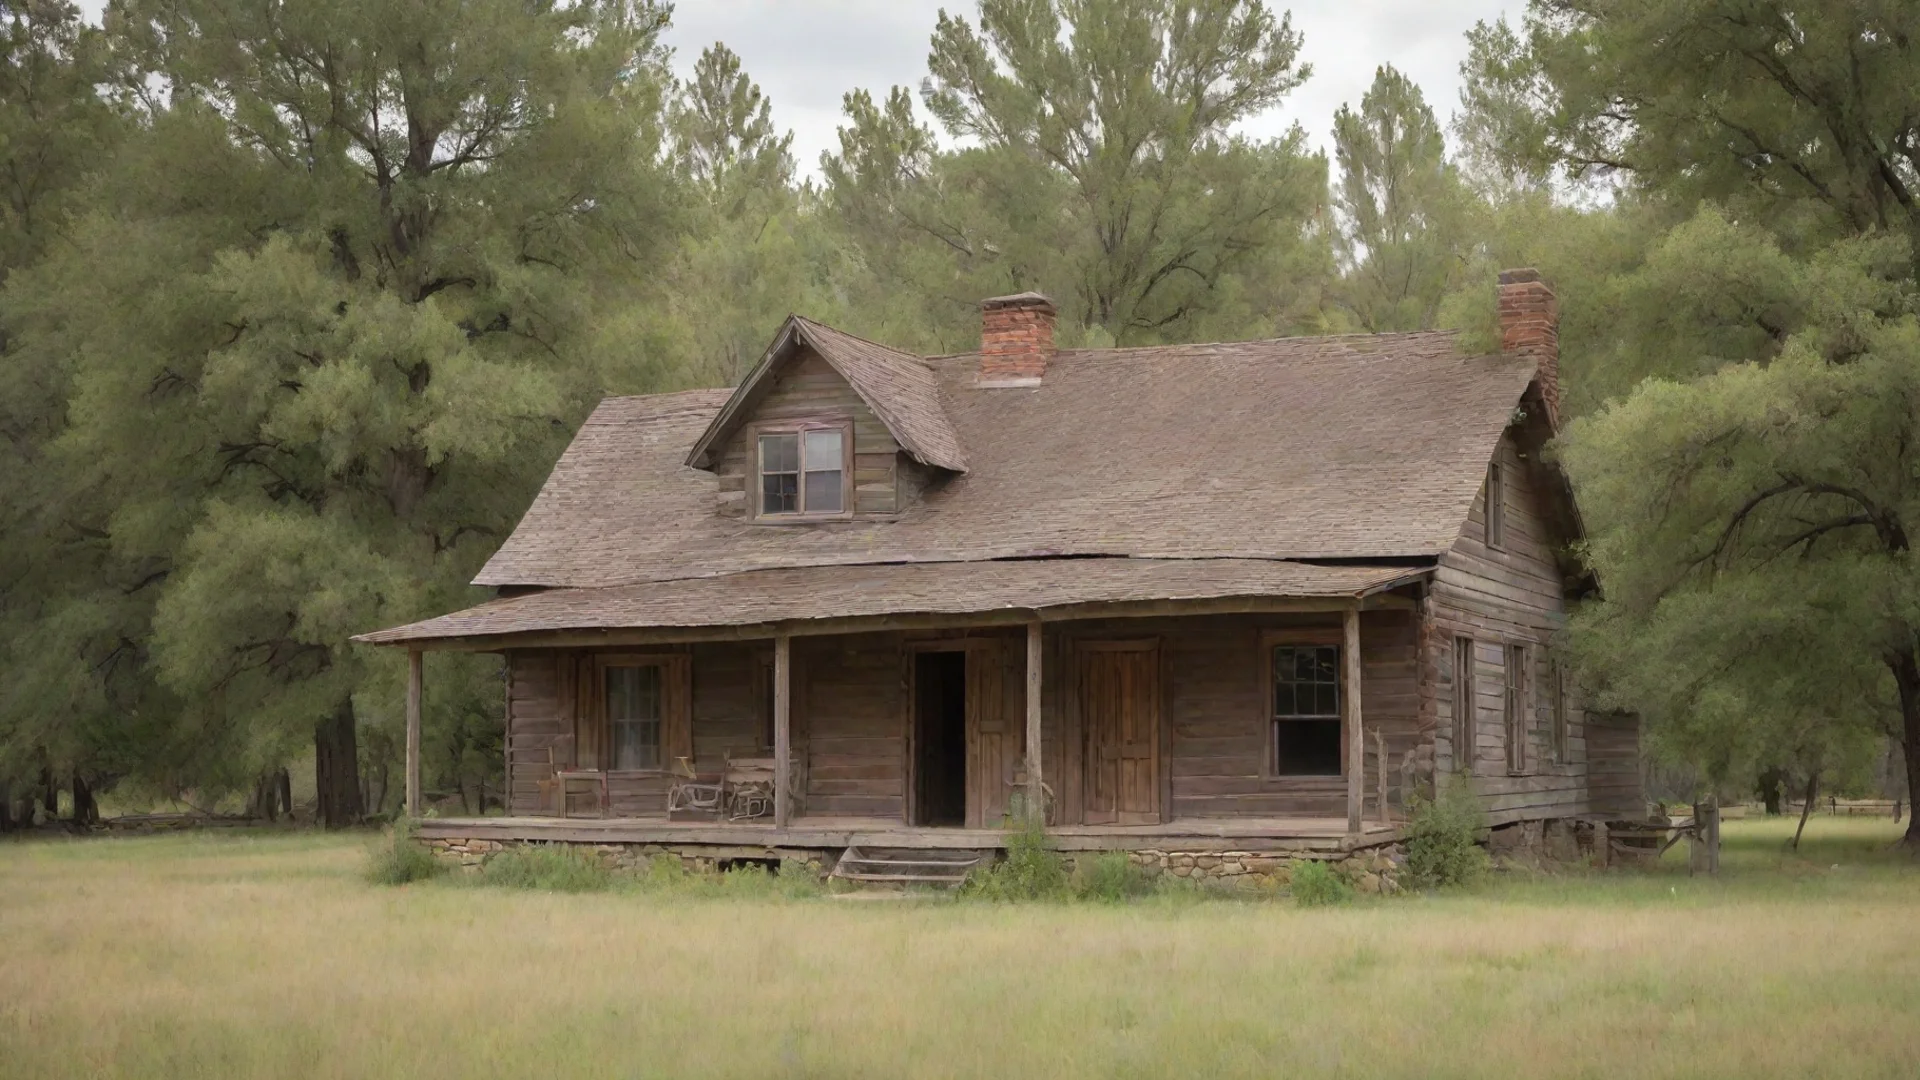 aiamazing peaceful old timey ranch house in nature with no humans pictured awesome portrait 2 wide